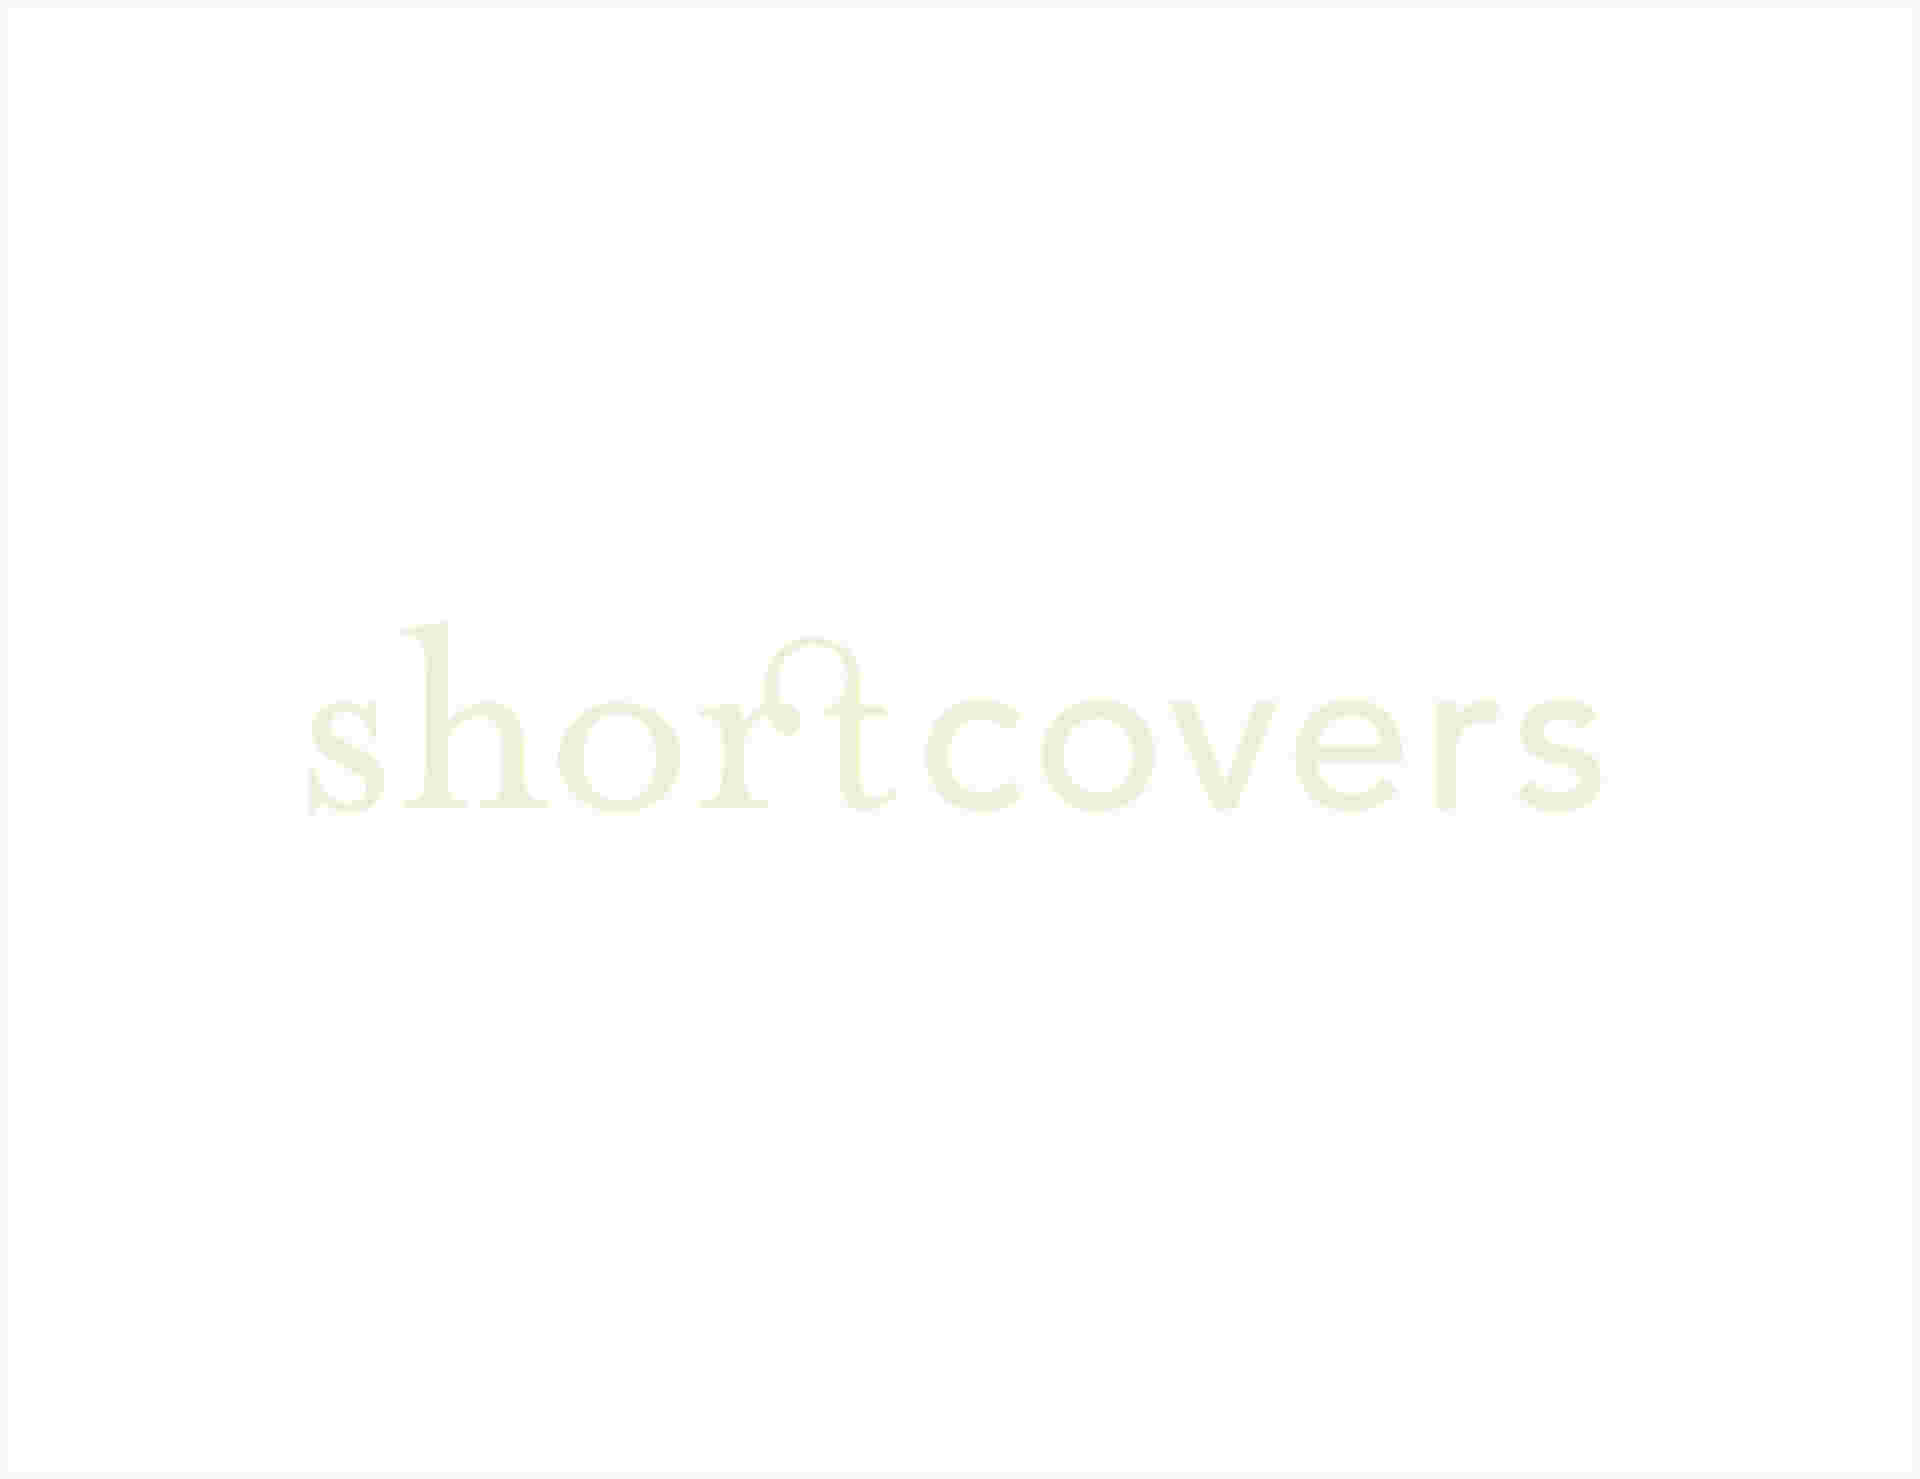 Shortcovers - shortcovers_2-1